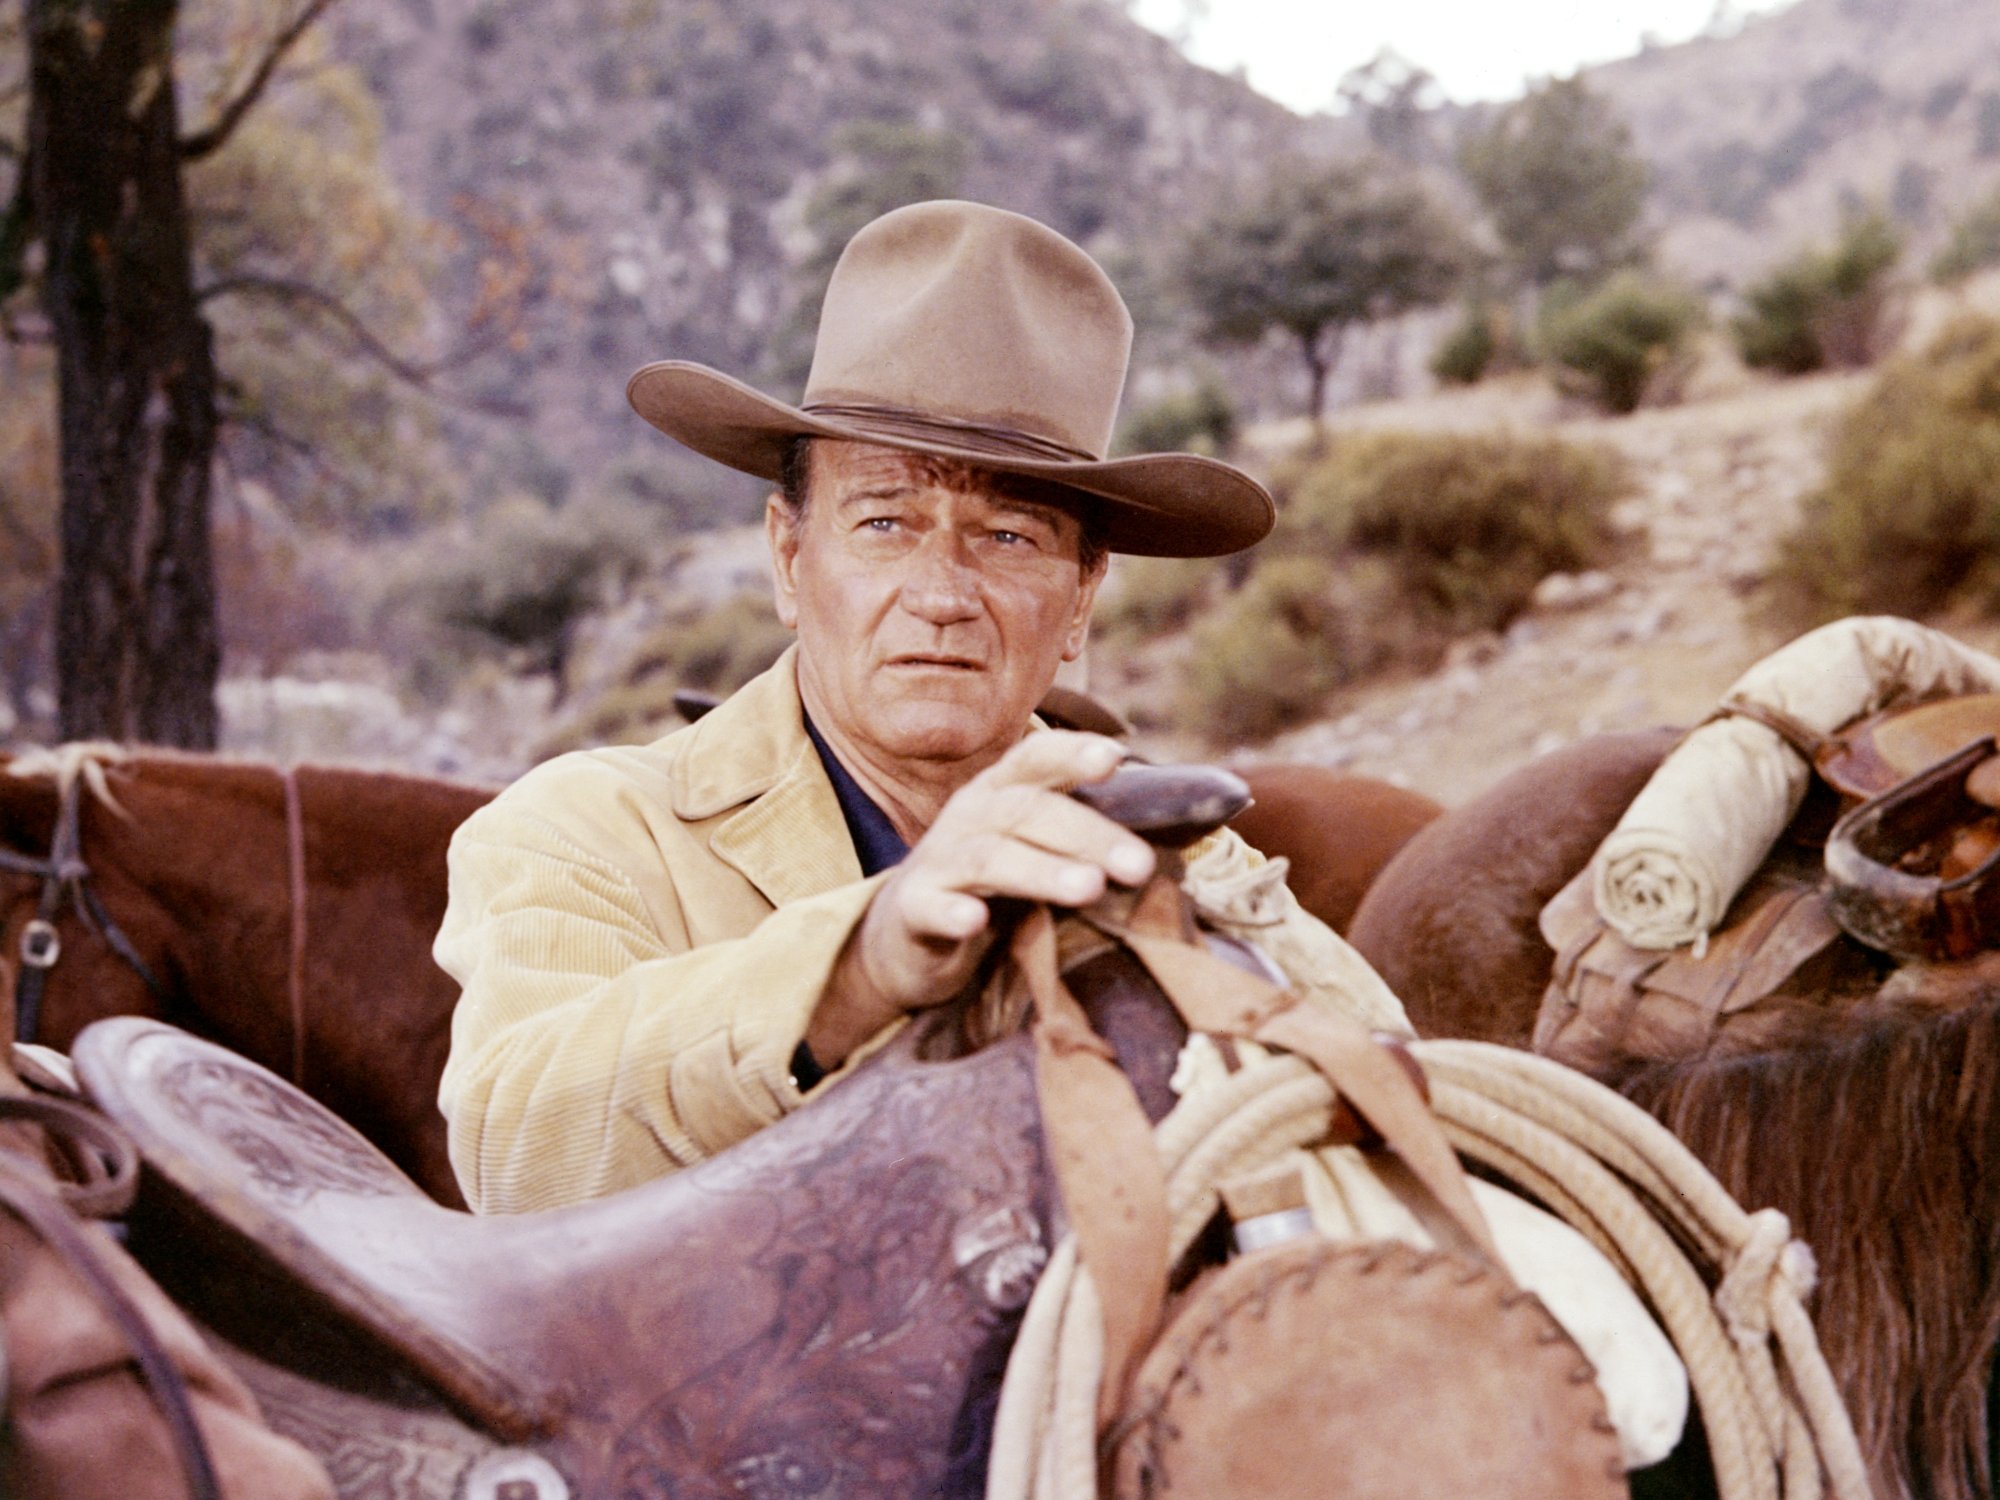 John Wayne movie star with his hand on the saddle of a horse while wearing a cowboy uniform